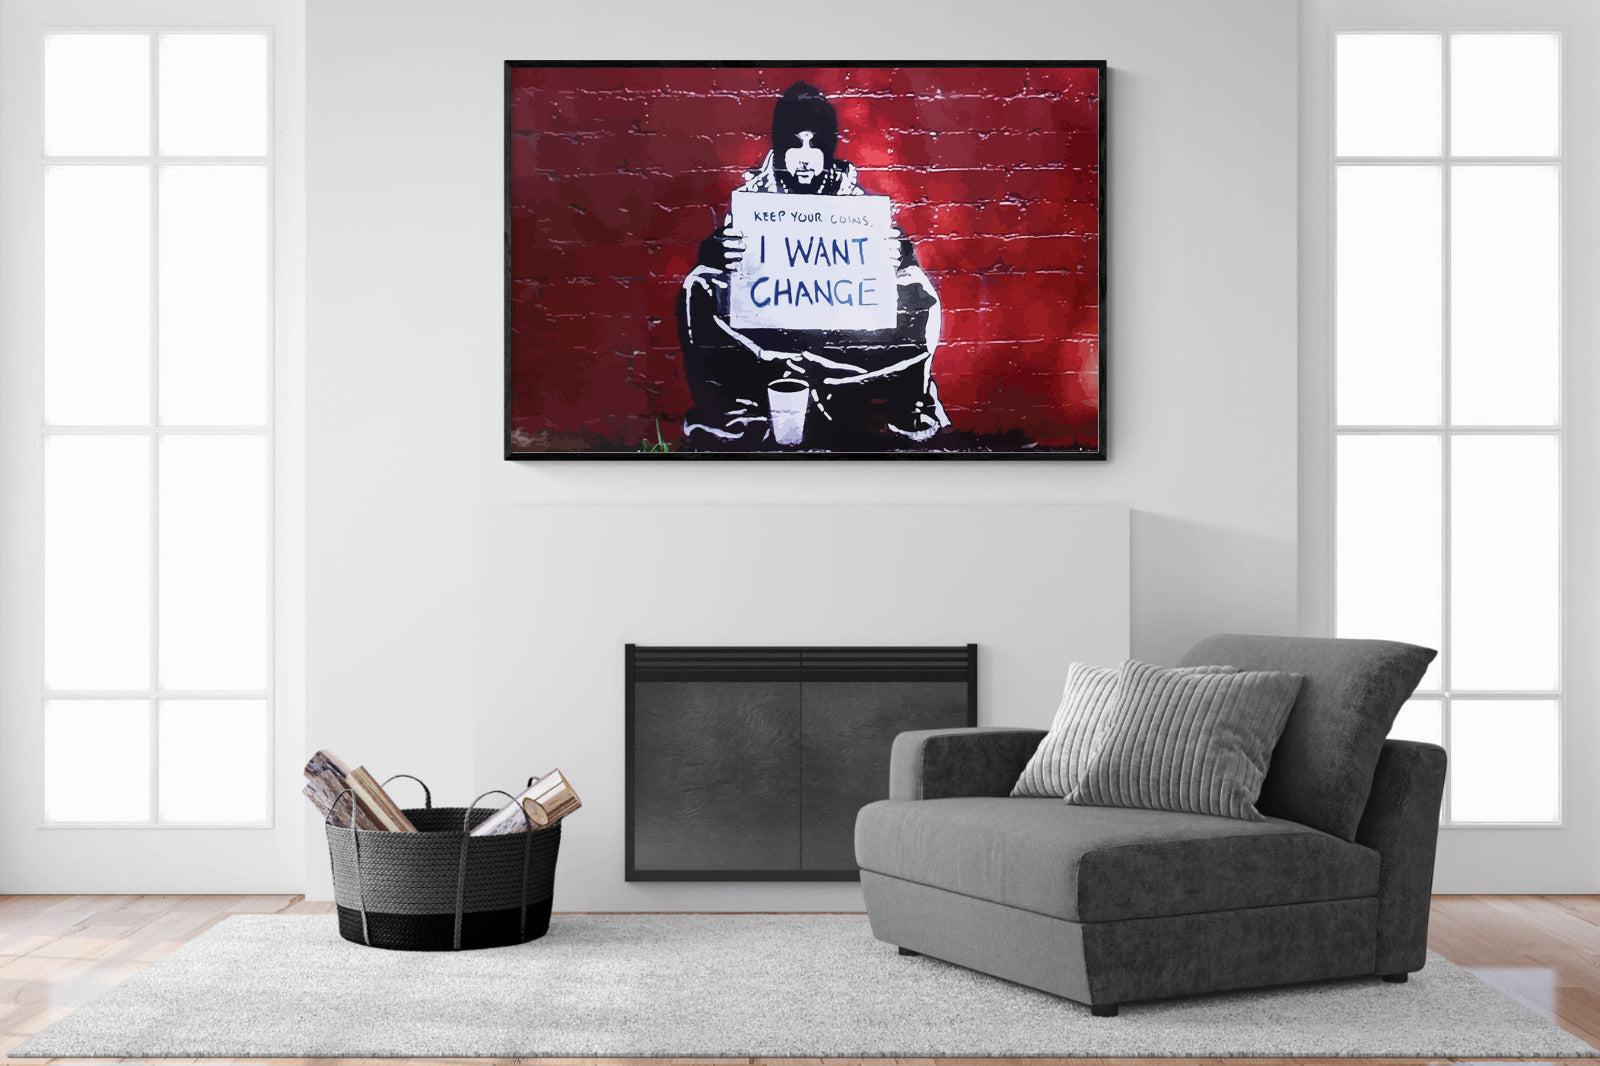 Keep Your Coins, I Want Change-Wall_Art-150 x 100cm-Mounted Canvas-Black-Pixalot